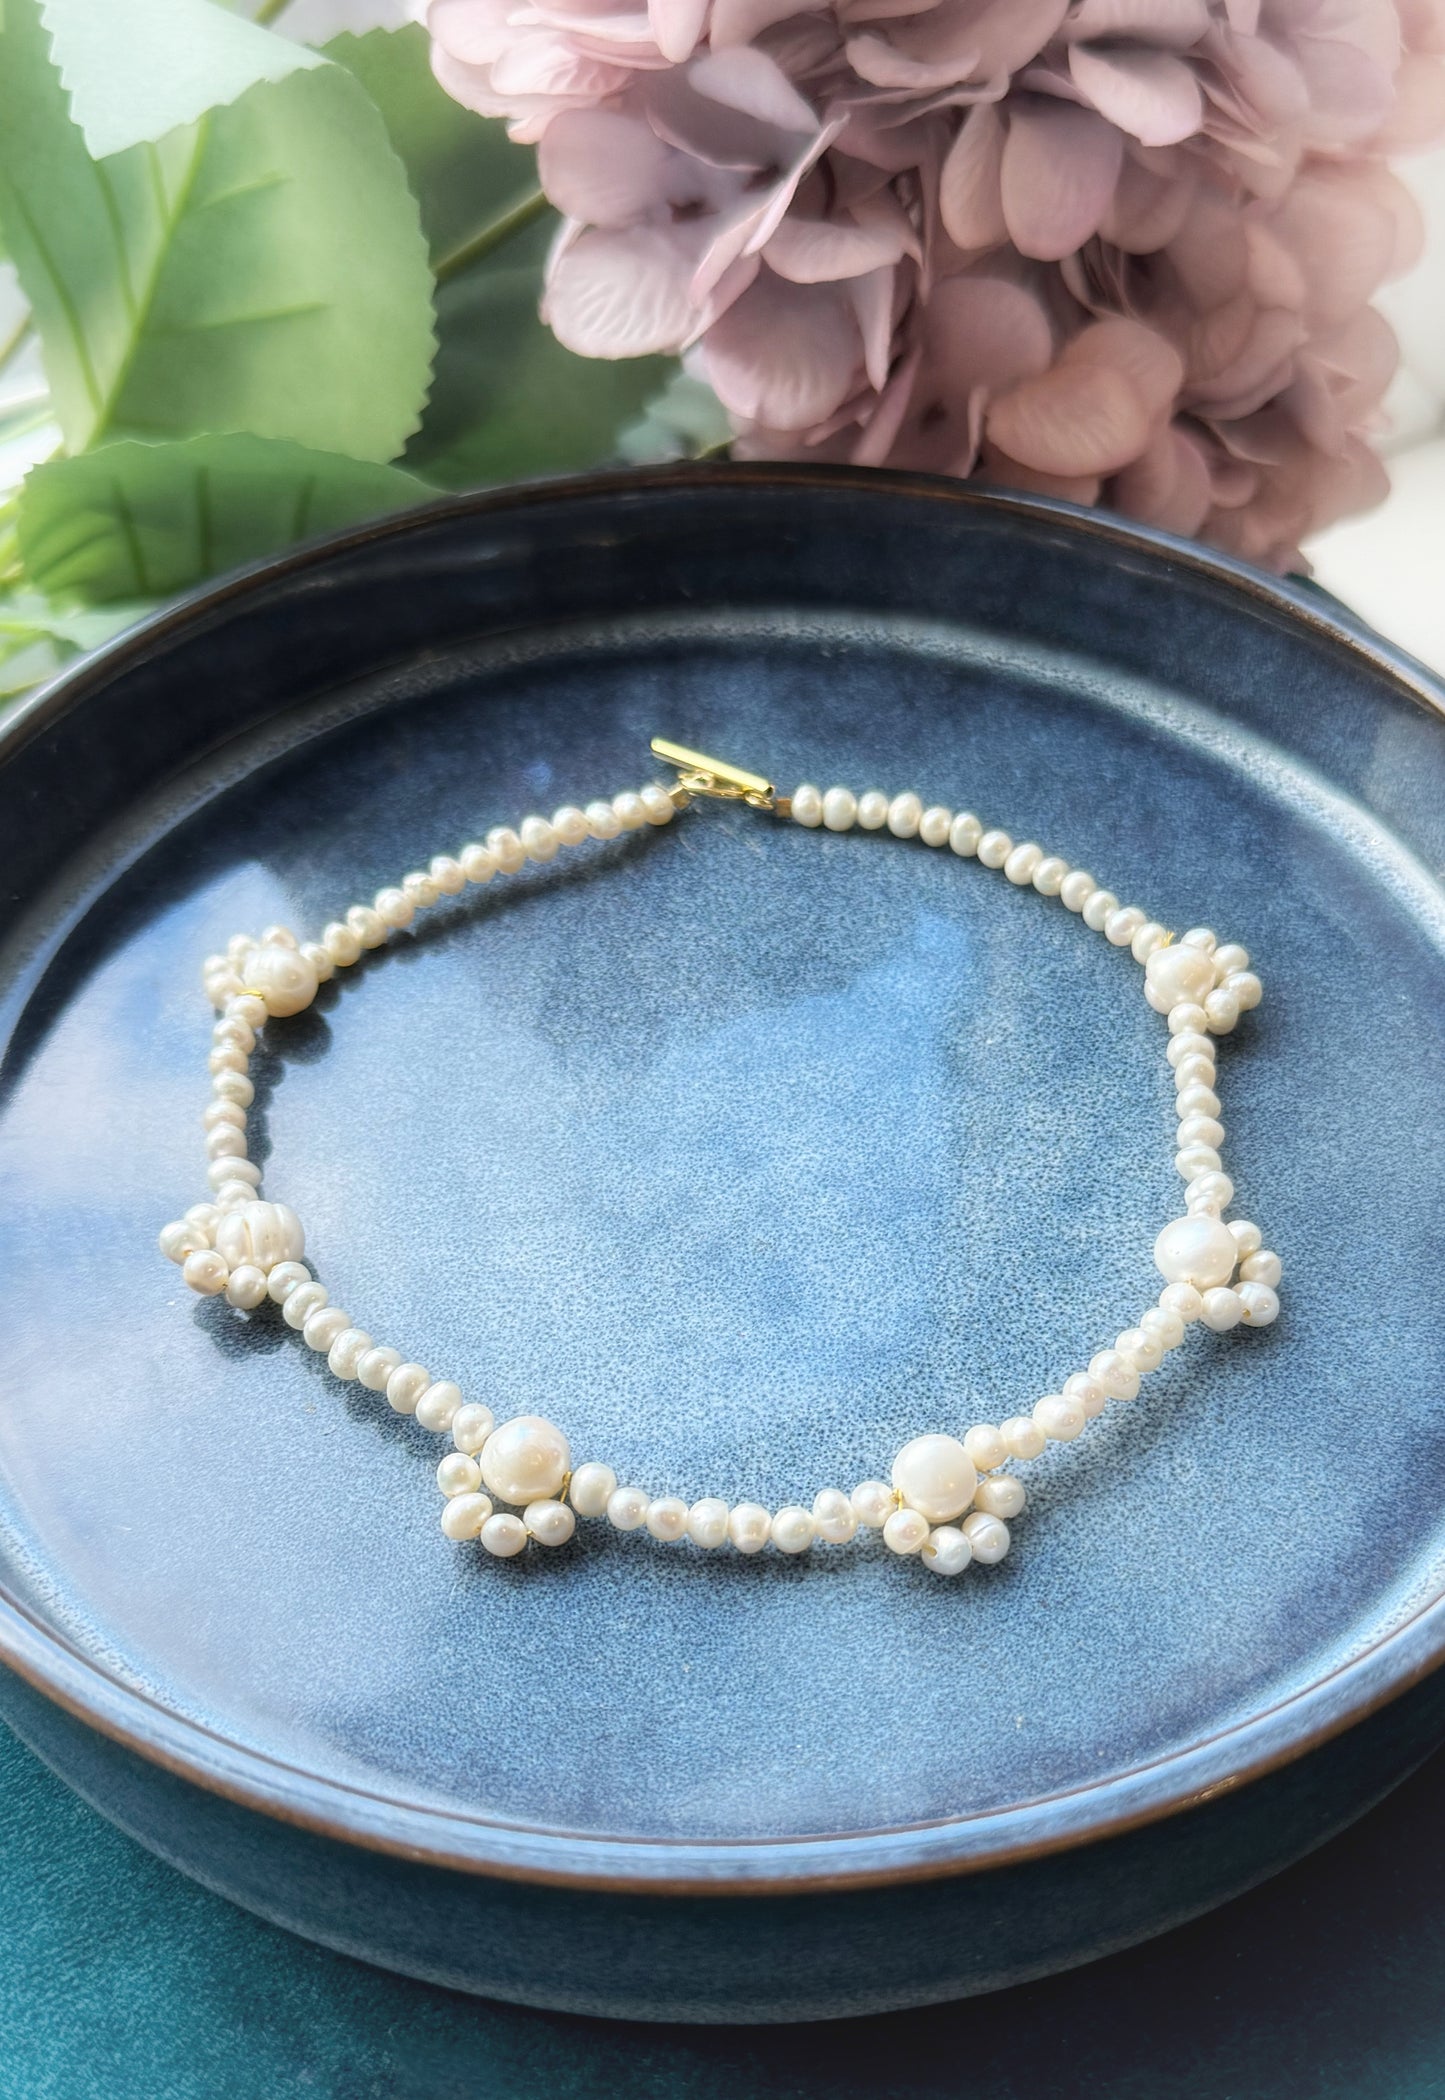 White freshwater pearl choker, old money pearl jewelry, quiet luxury choker necklace